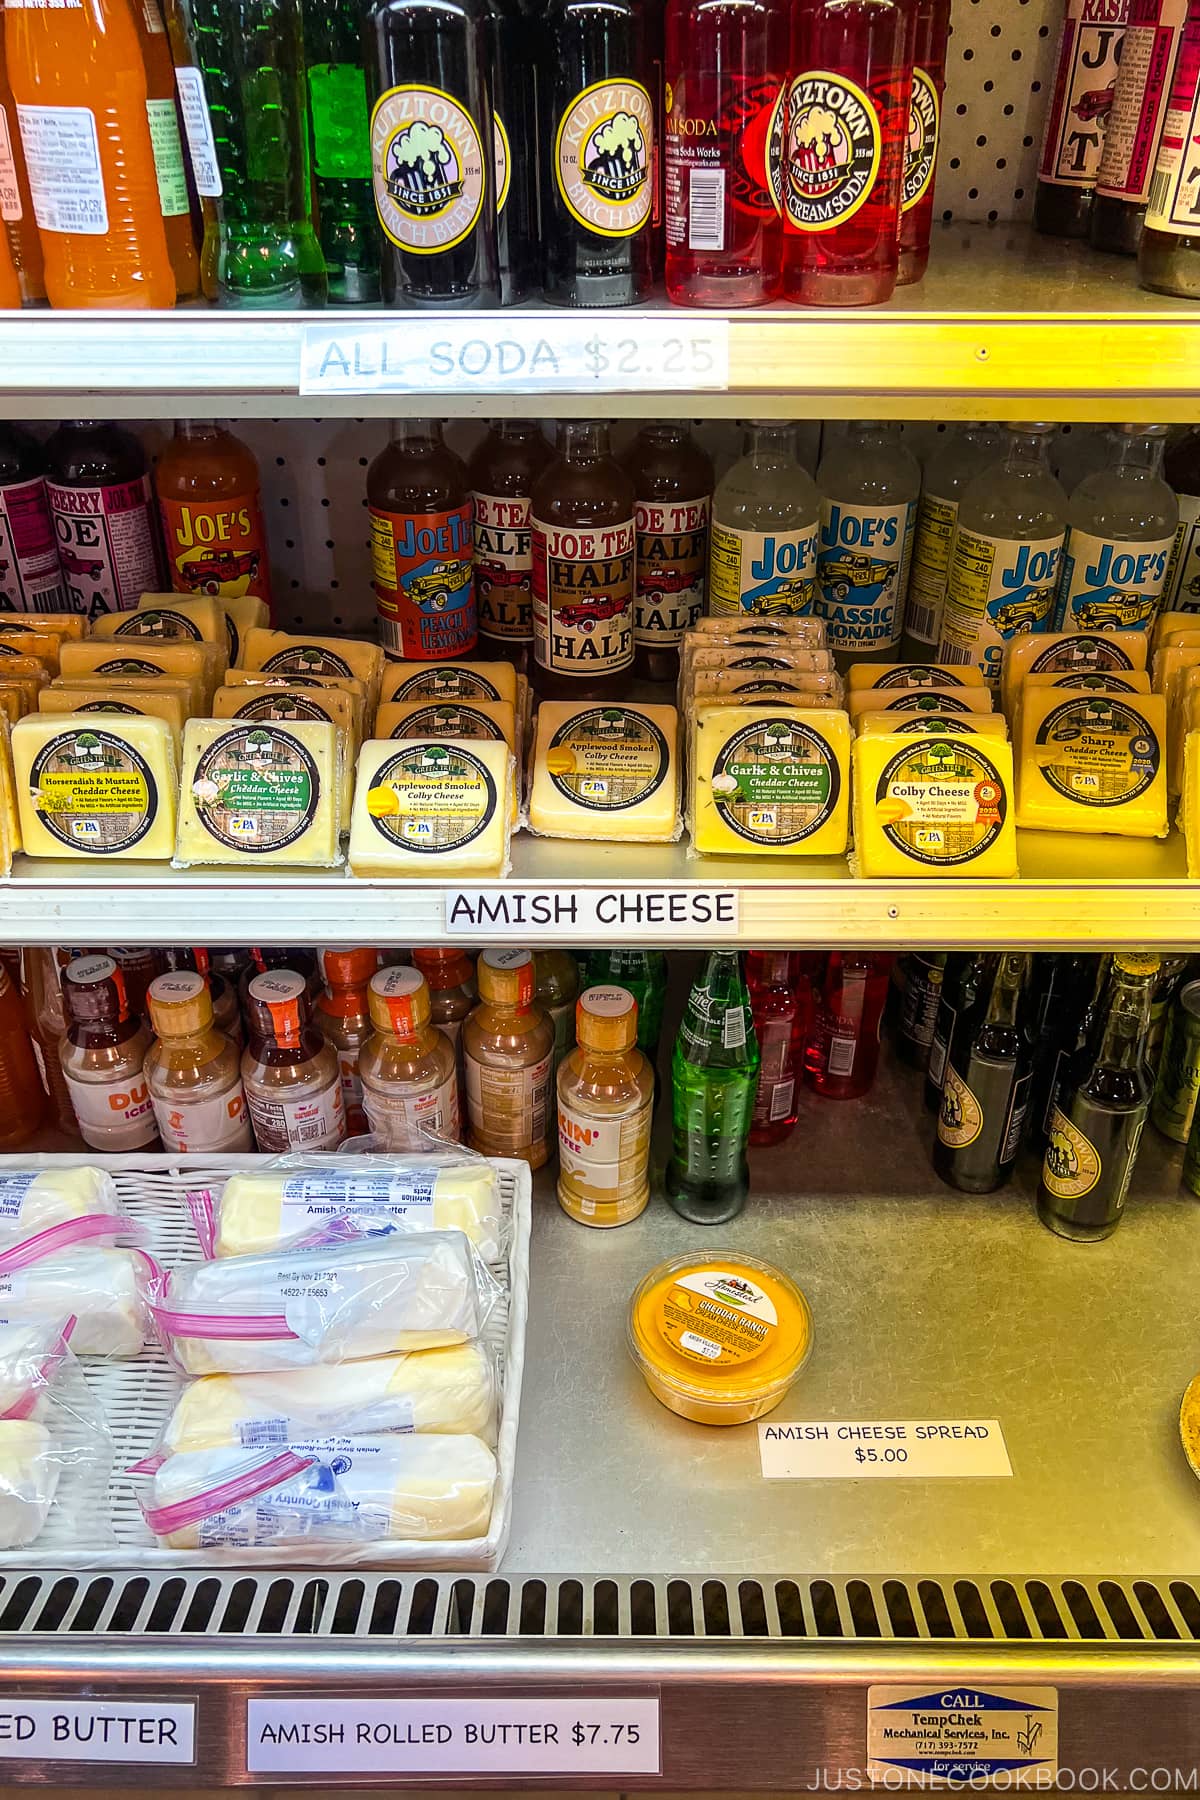 Amish cheese in a shelf